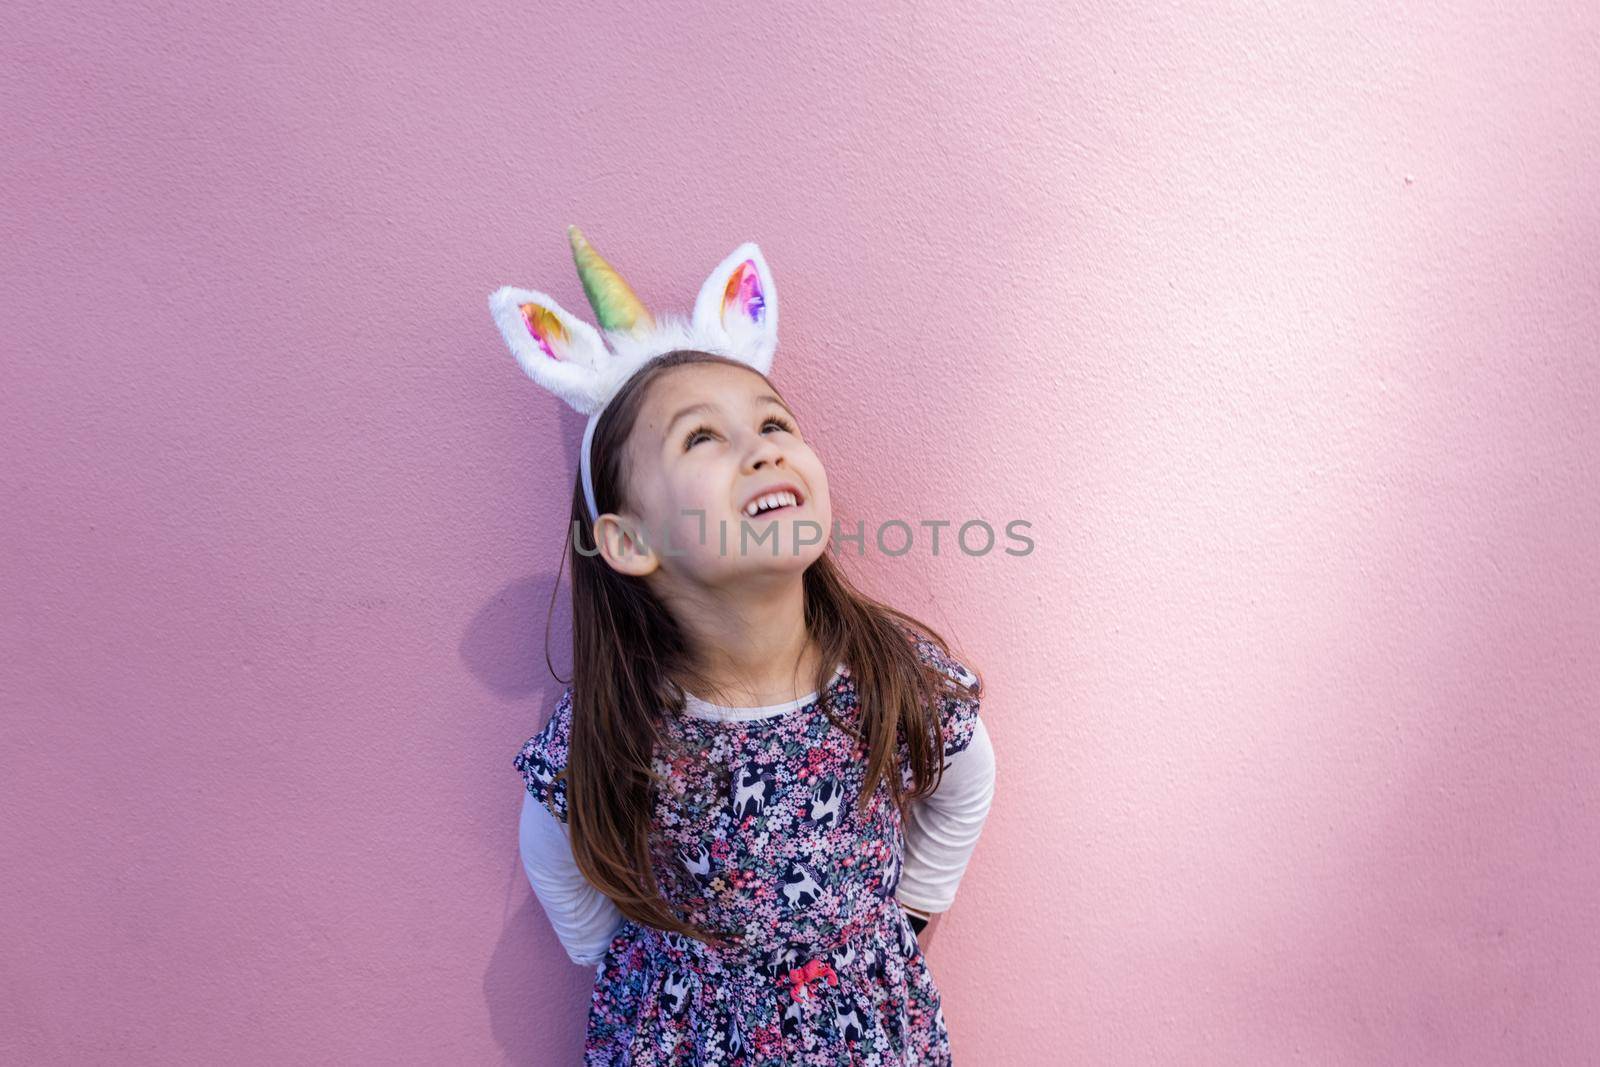 Adorable happy little girl looking up and wearing unicorn headband with pink background. Portrait of cute smiling child with unicorn horn and ears in front bright pink wall. Lovely kids in costumes